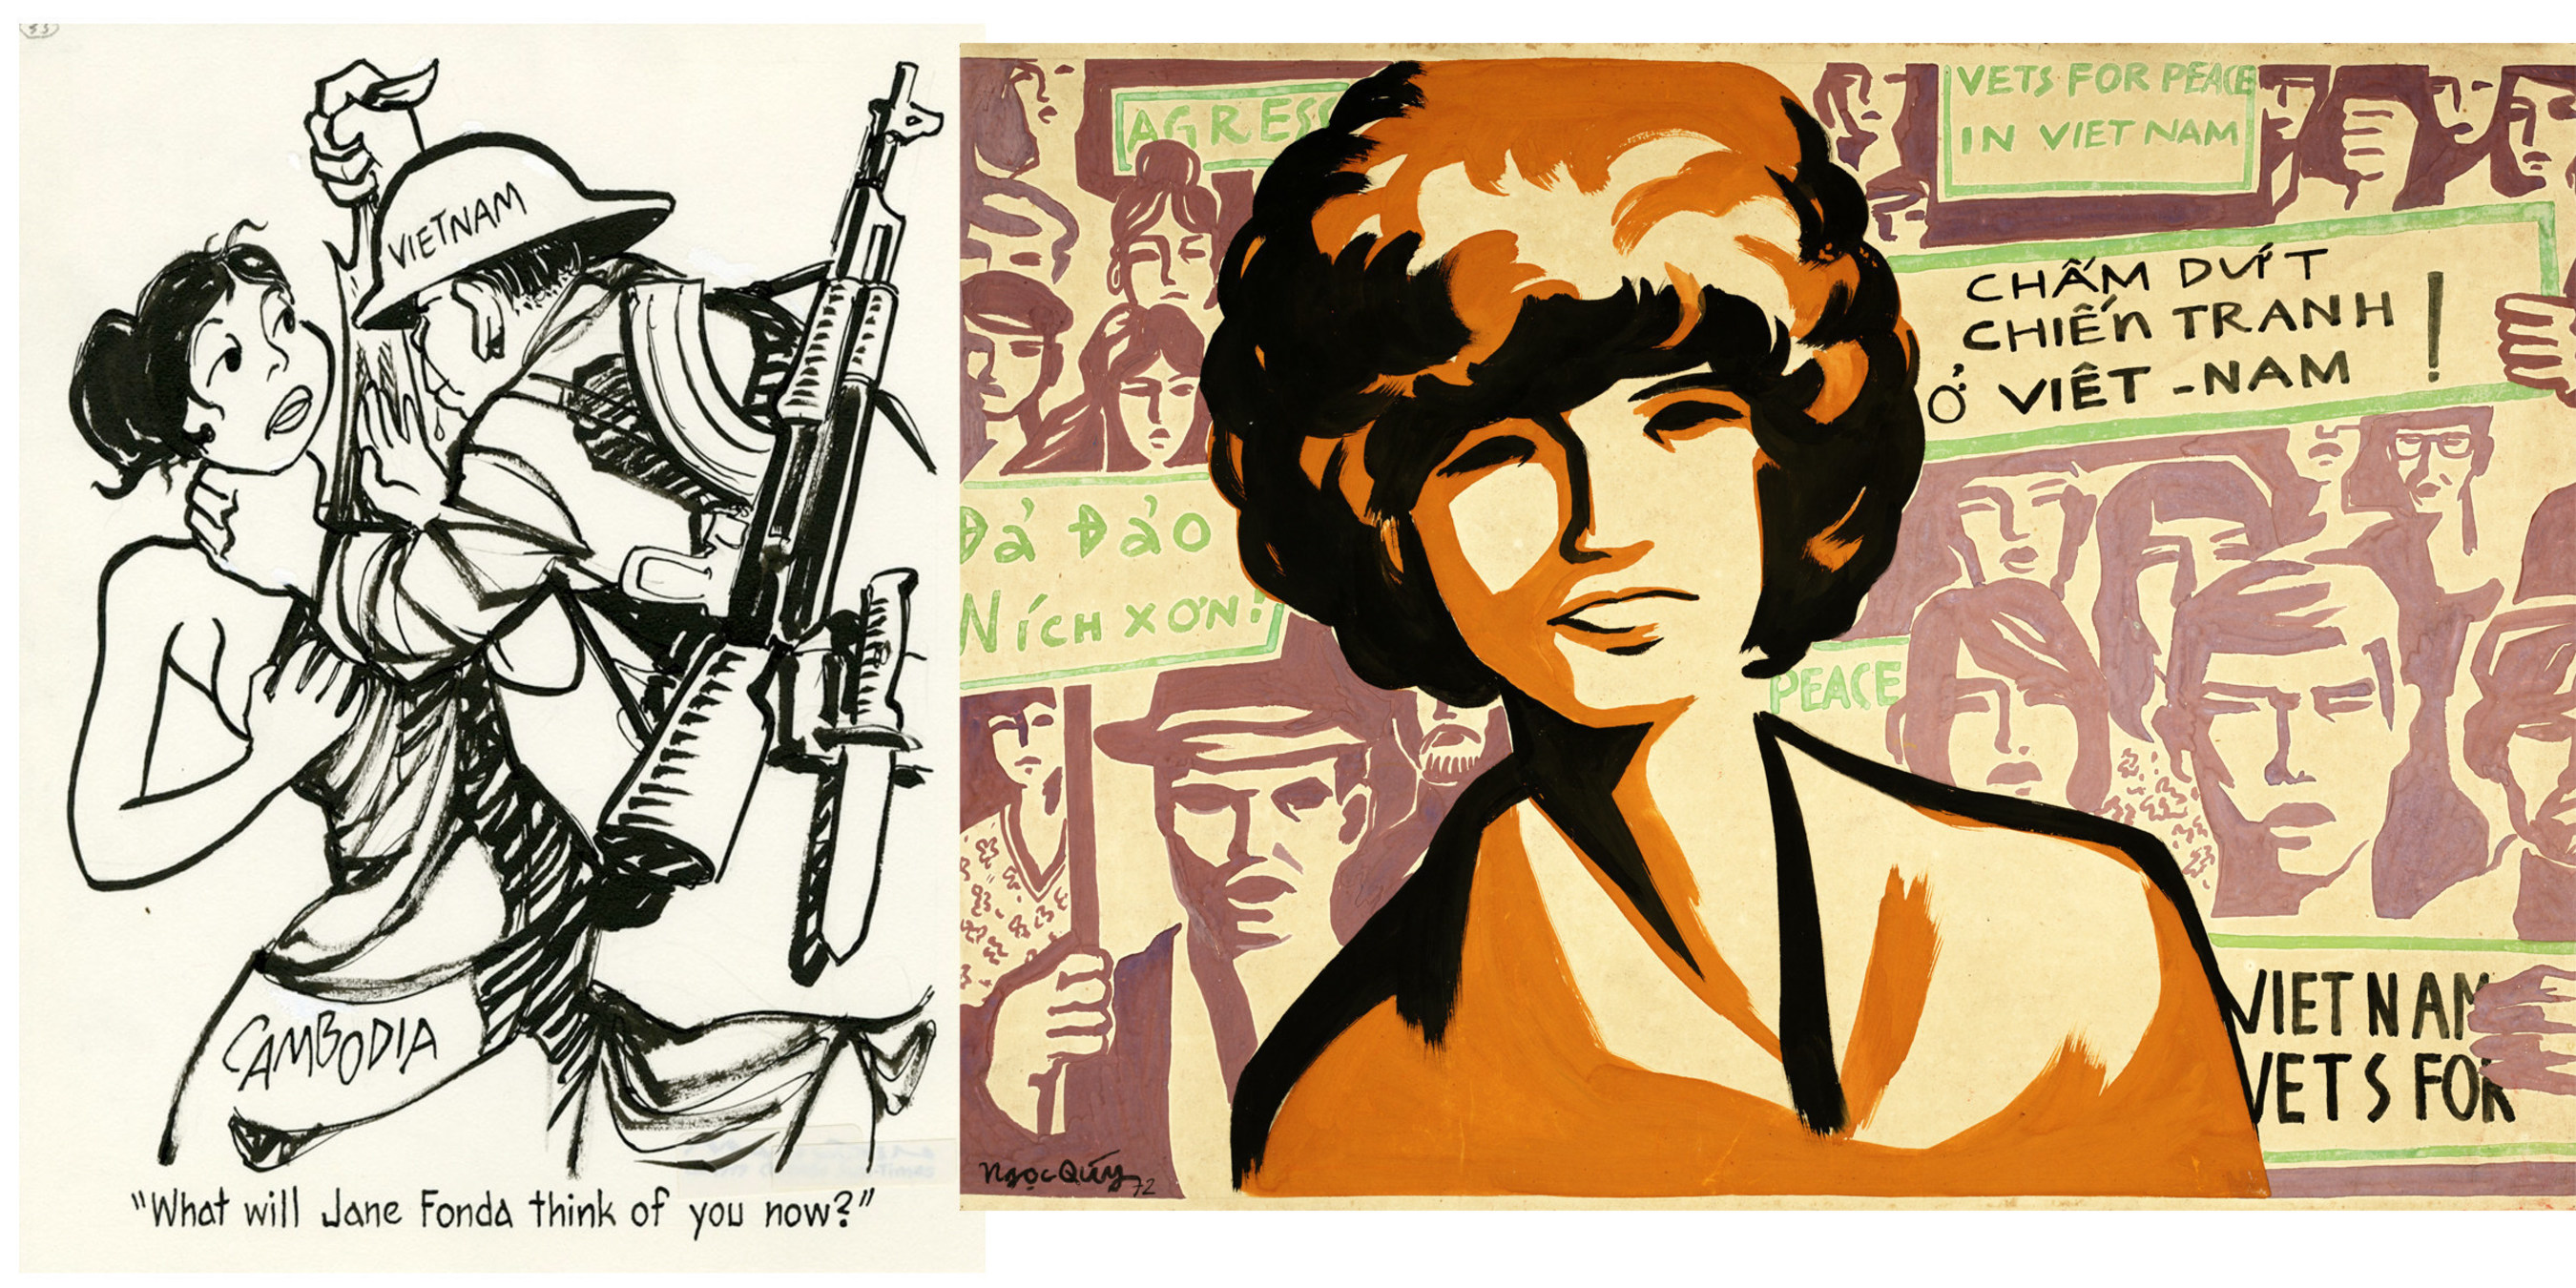 Left Image: "What will Jane Fonda think of you now? Mauldin, William (1921-2003) Ca. 1978Right Image: "End the war in Vietnam /Chấm dứt chiến tranh ở Việt-Nam Down with Nixon!/Đả Đảo Nich-xơn!" Ngọc Quy, 1972